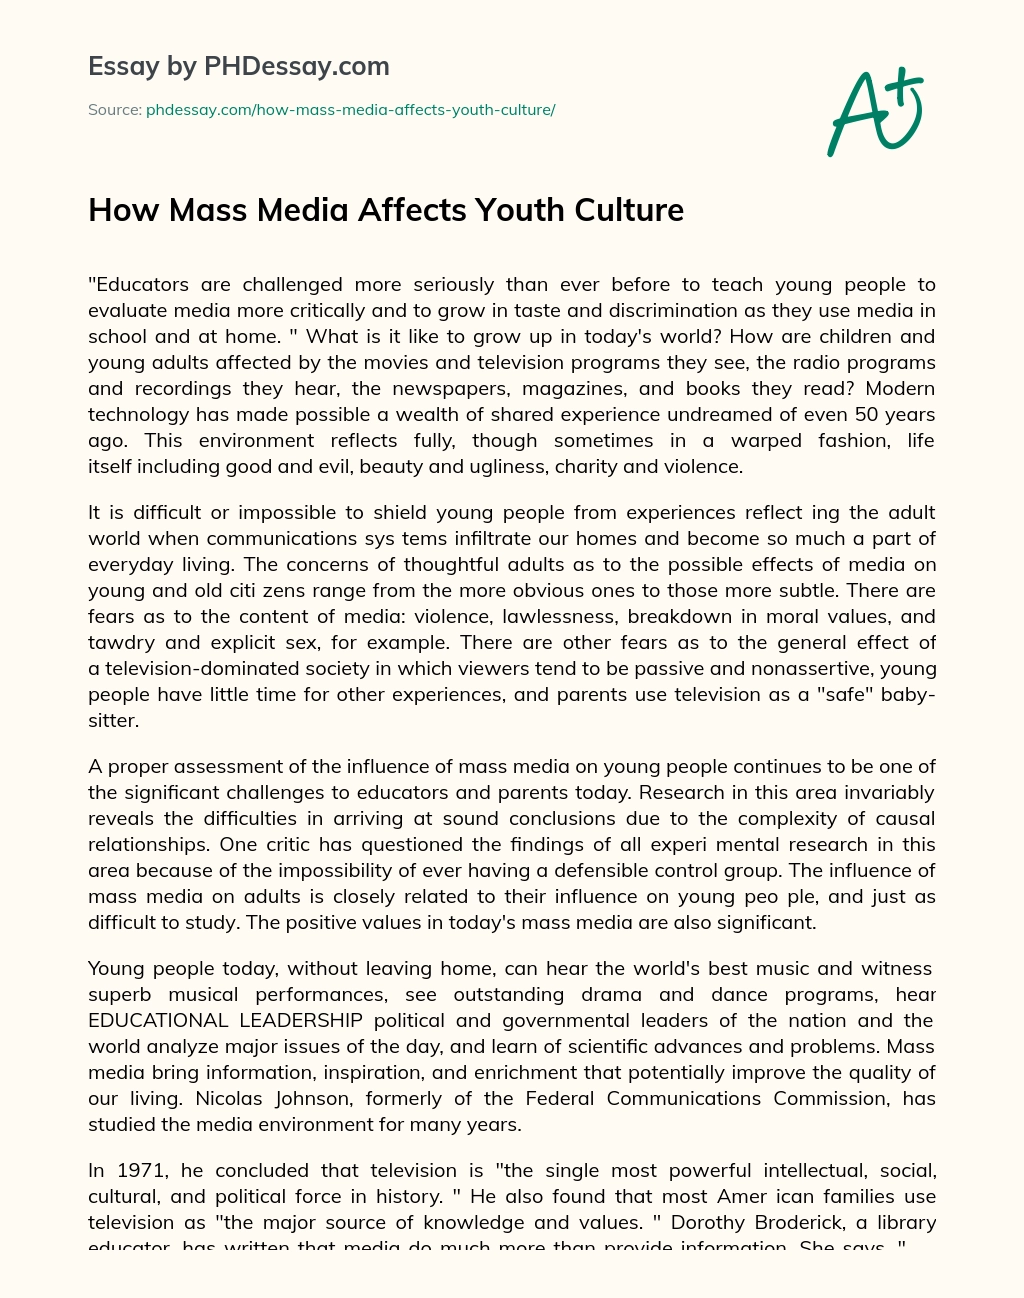 How Mass Media Affects Youth Culture essay